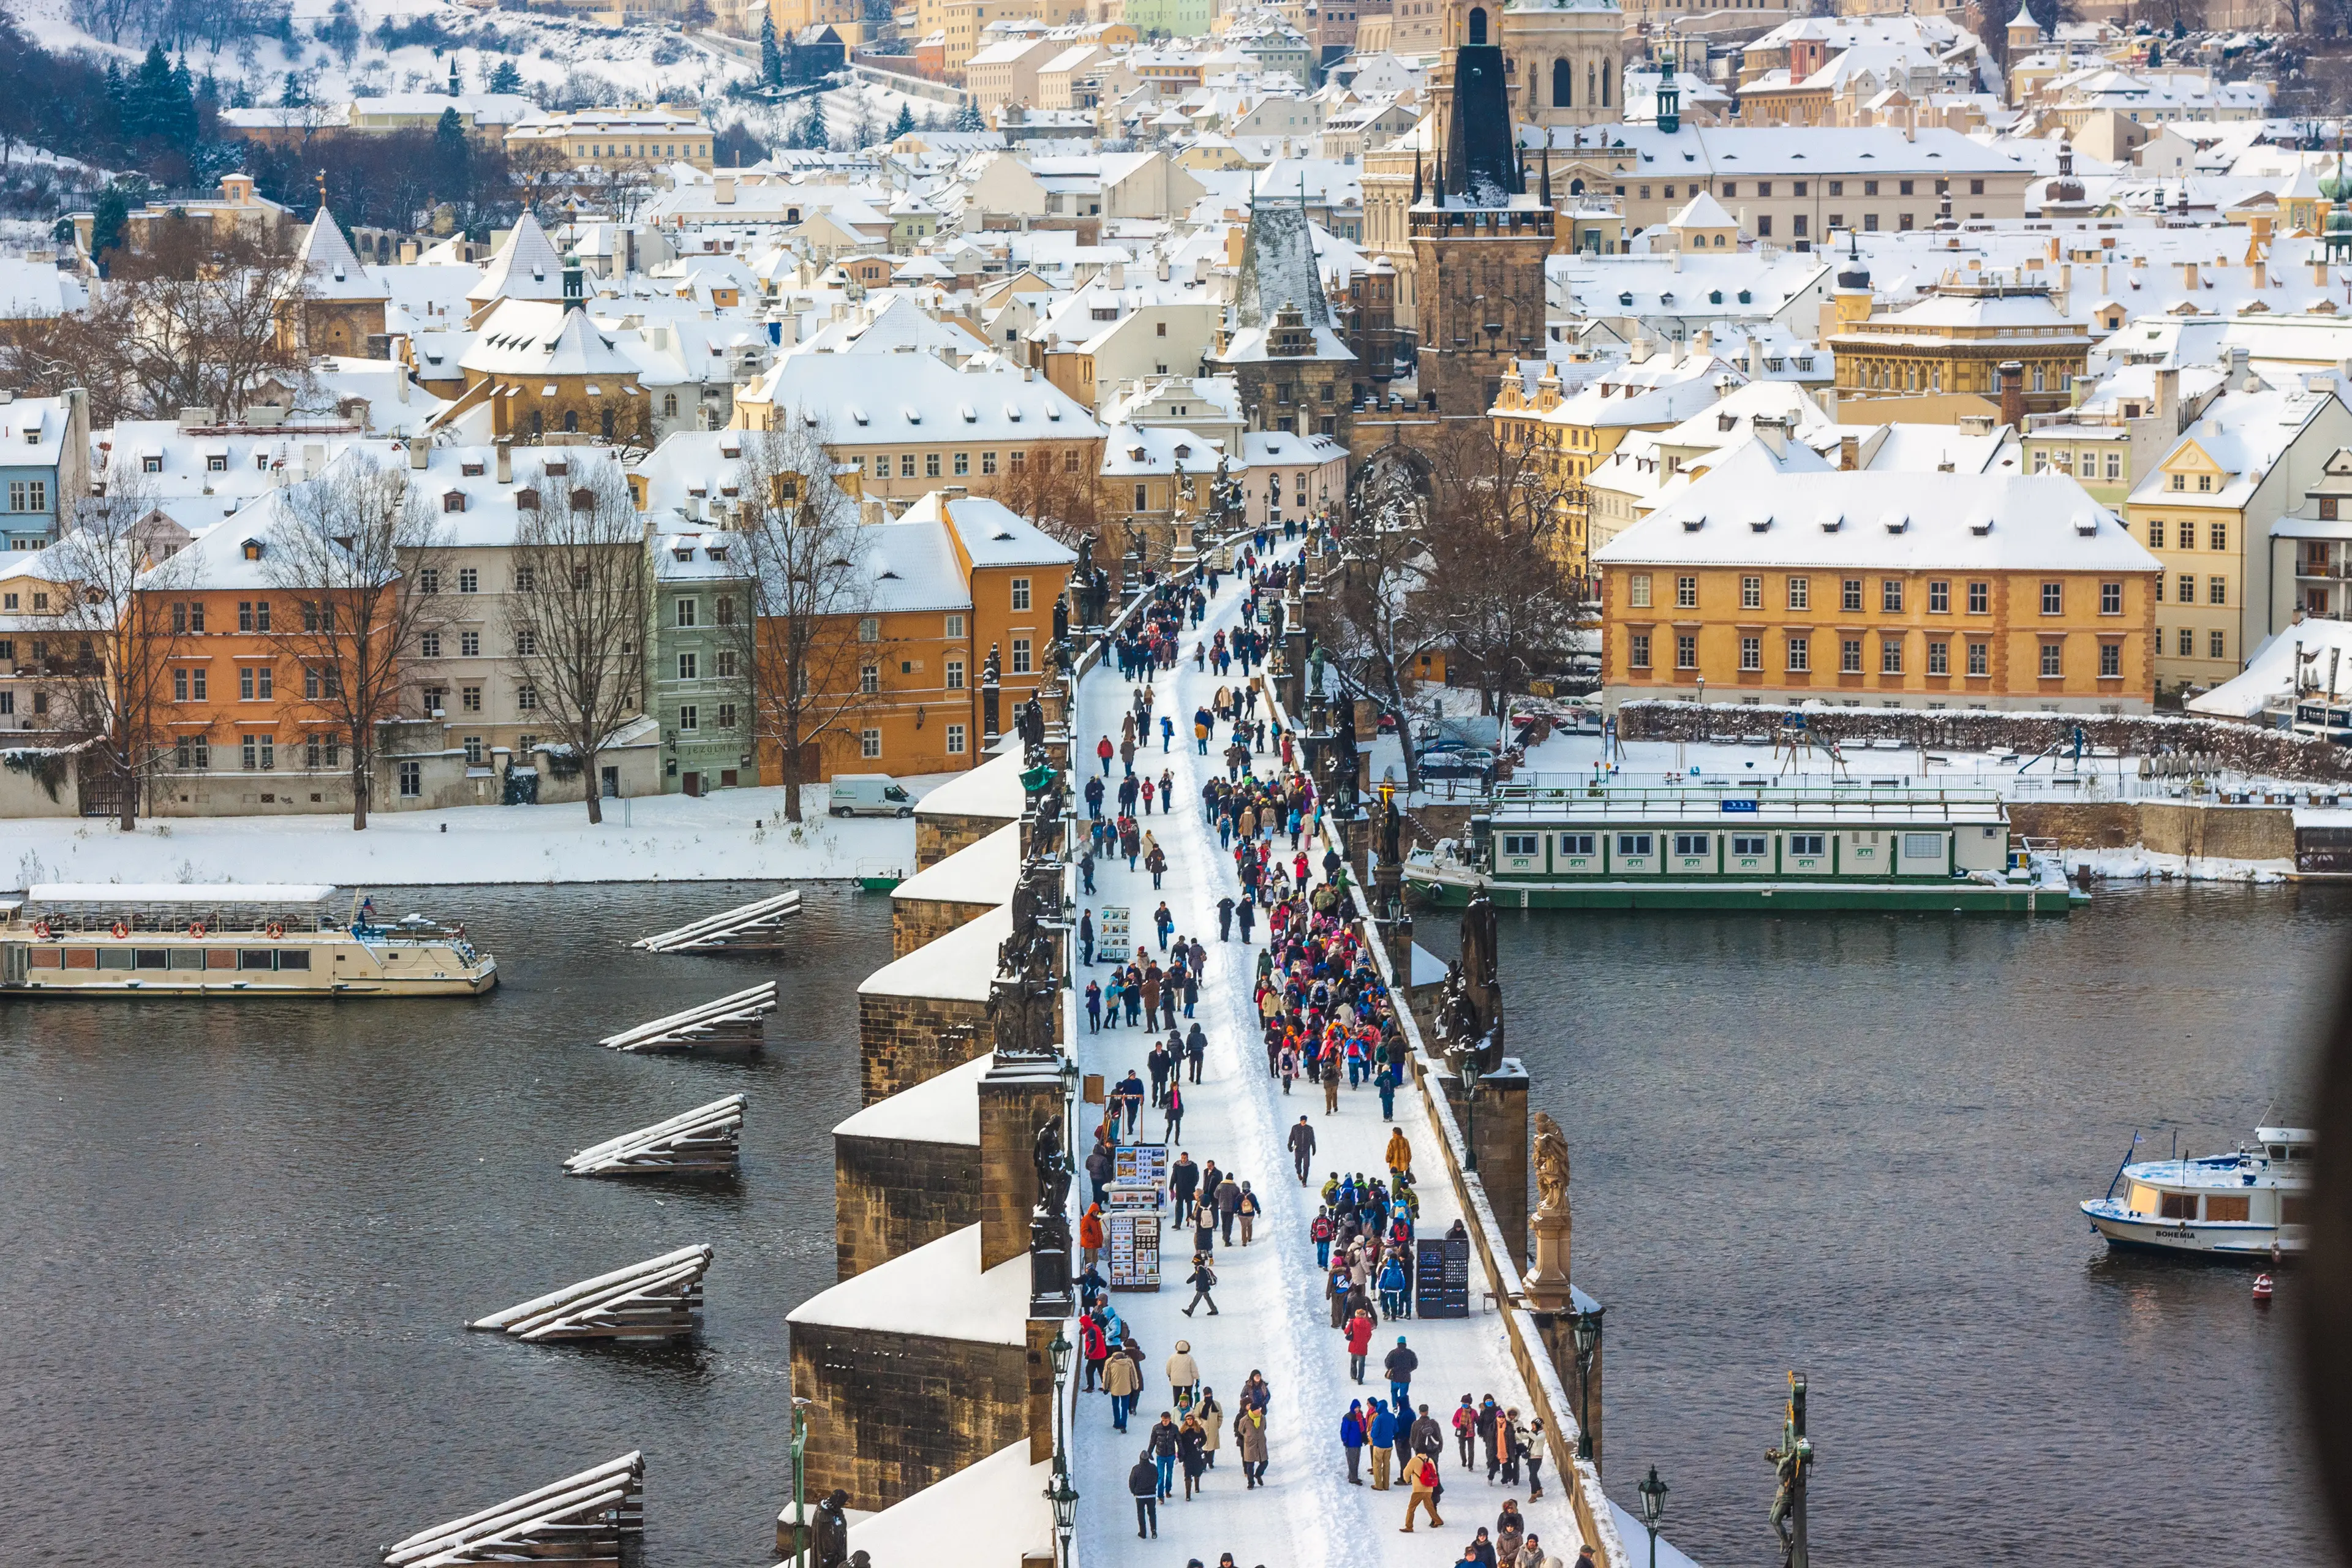 5-Day Christmas Holiday Adventure in Prague, Czech Republic